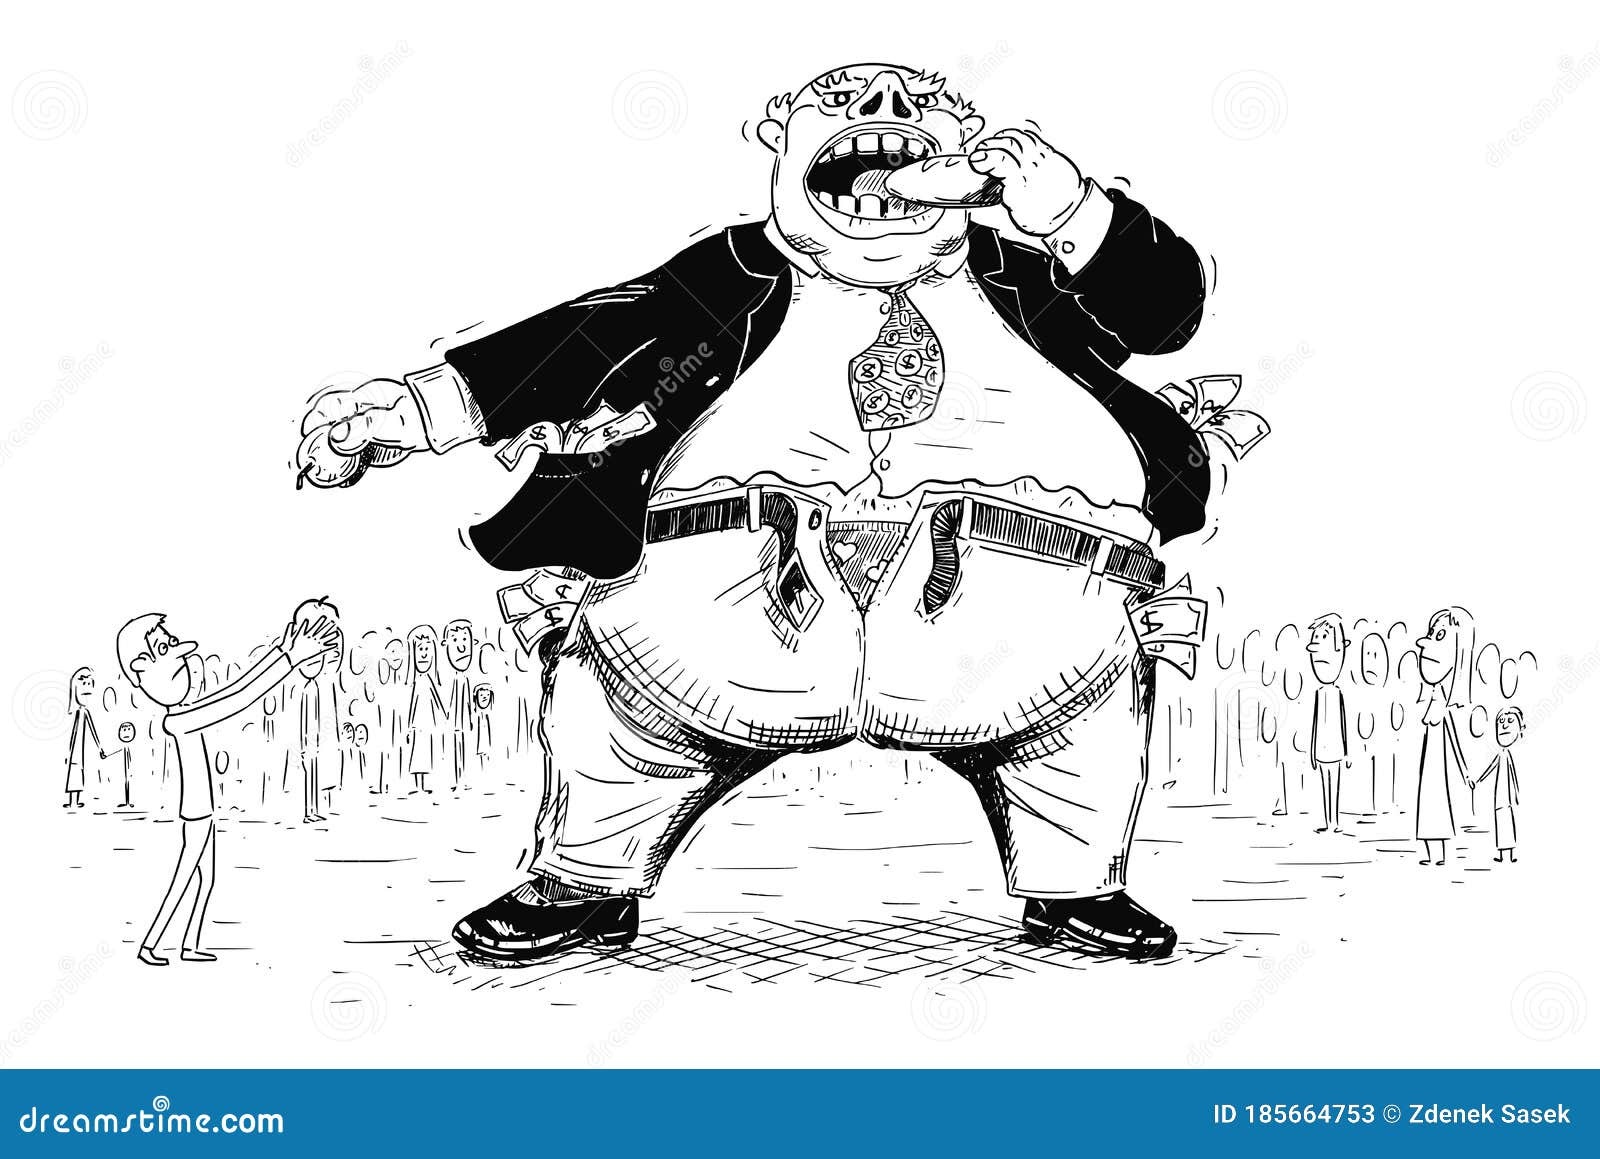  cartoon  of fat rich man, businessman or capitalist eating the food of small poor people around.